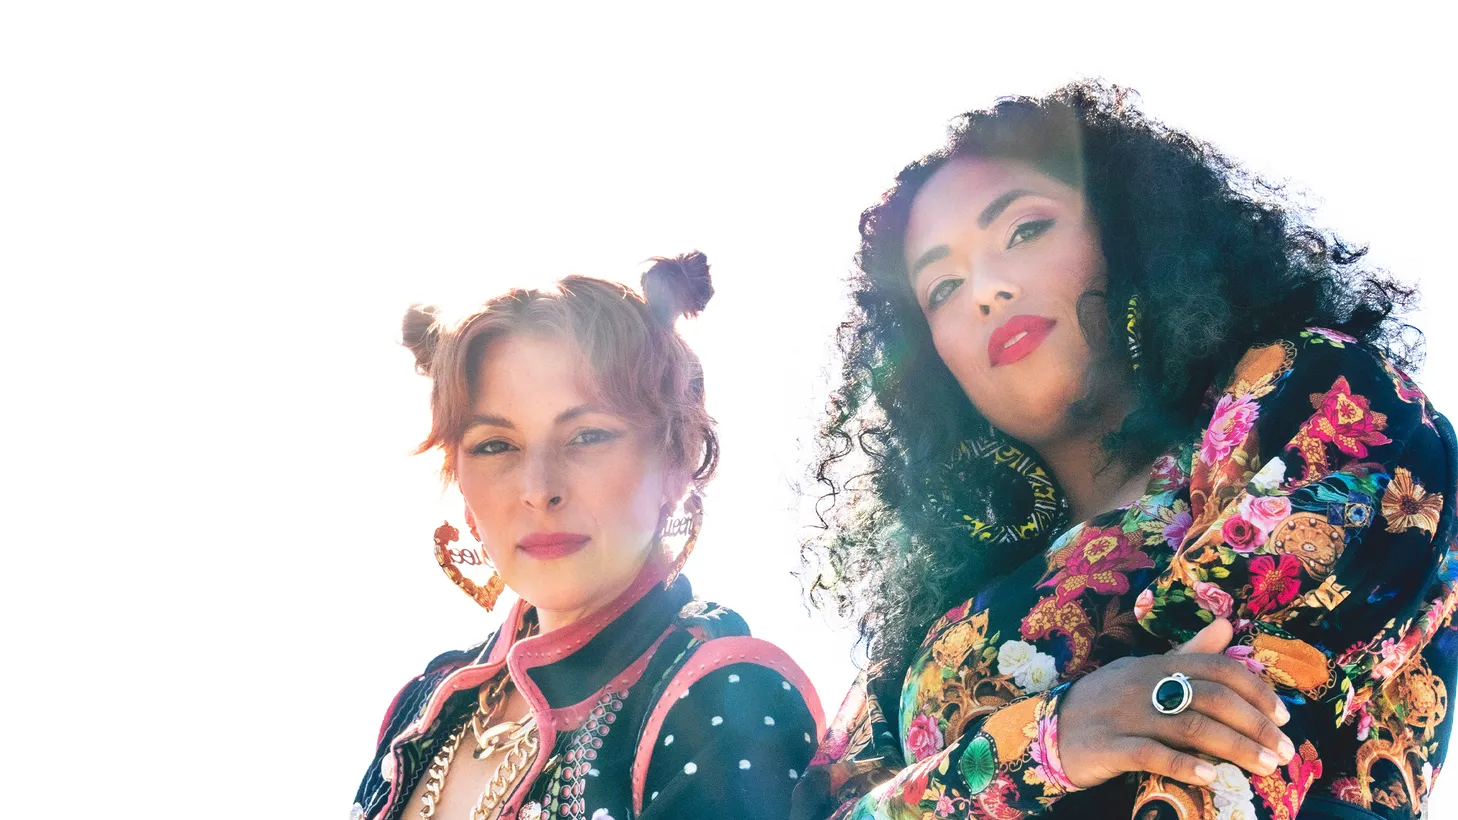 The all-women mariachi outfit and Latin Grammy champions Flor de Toloache seduce us with a samba-inspired track guaranteed to send your winter blues away. “Una Vida Y Otra Mas” unleashes their feminist power in an epic song.